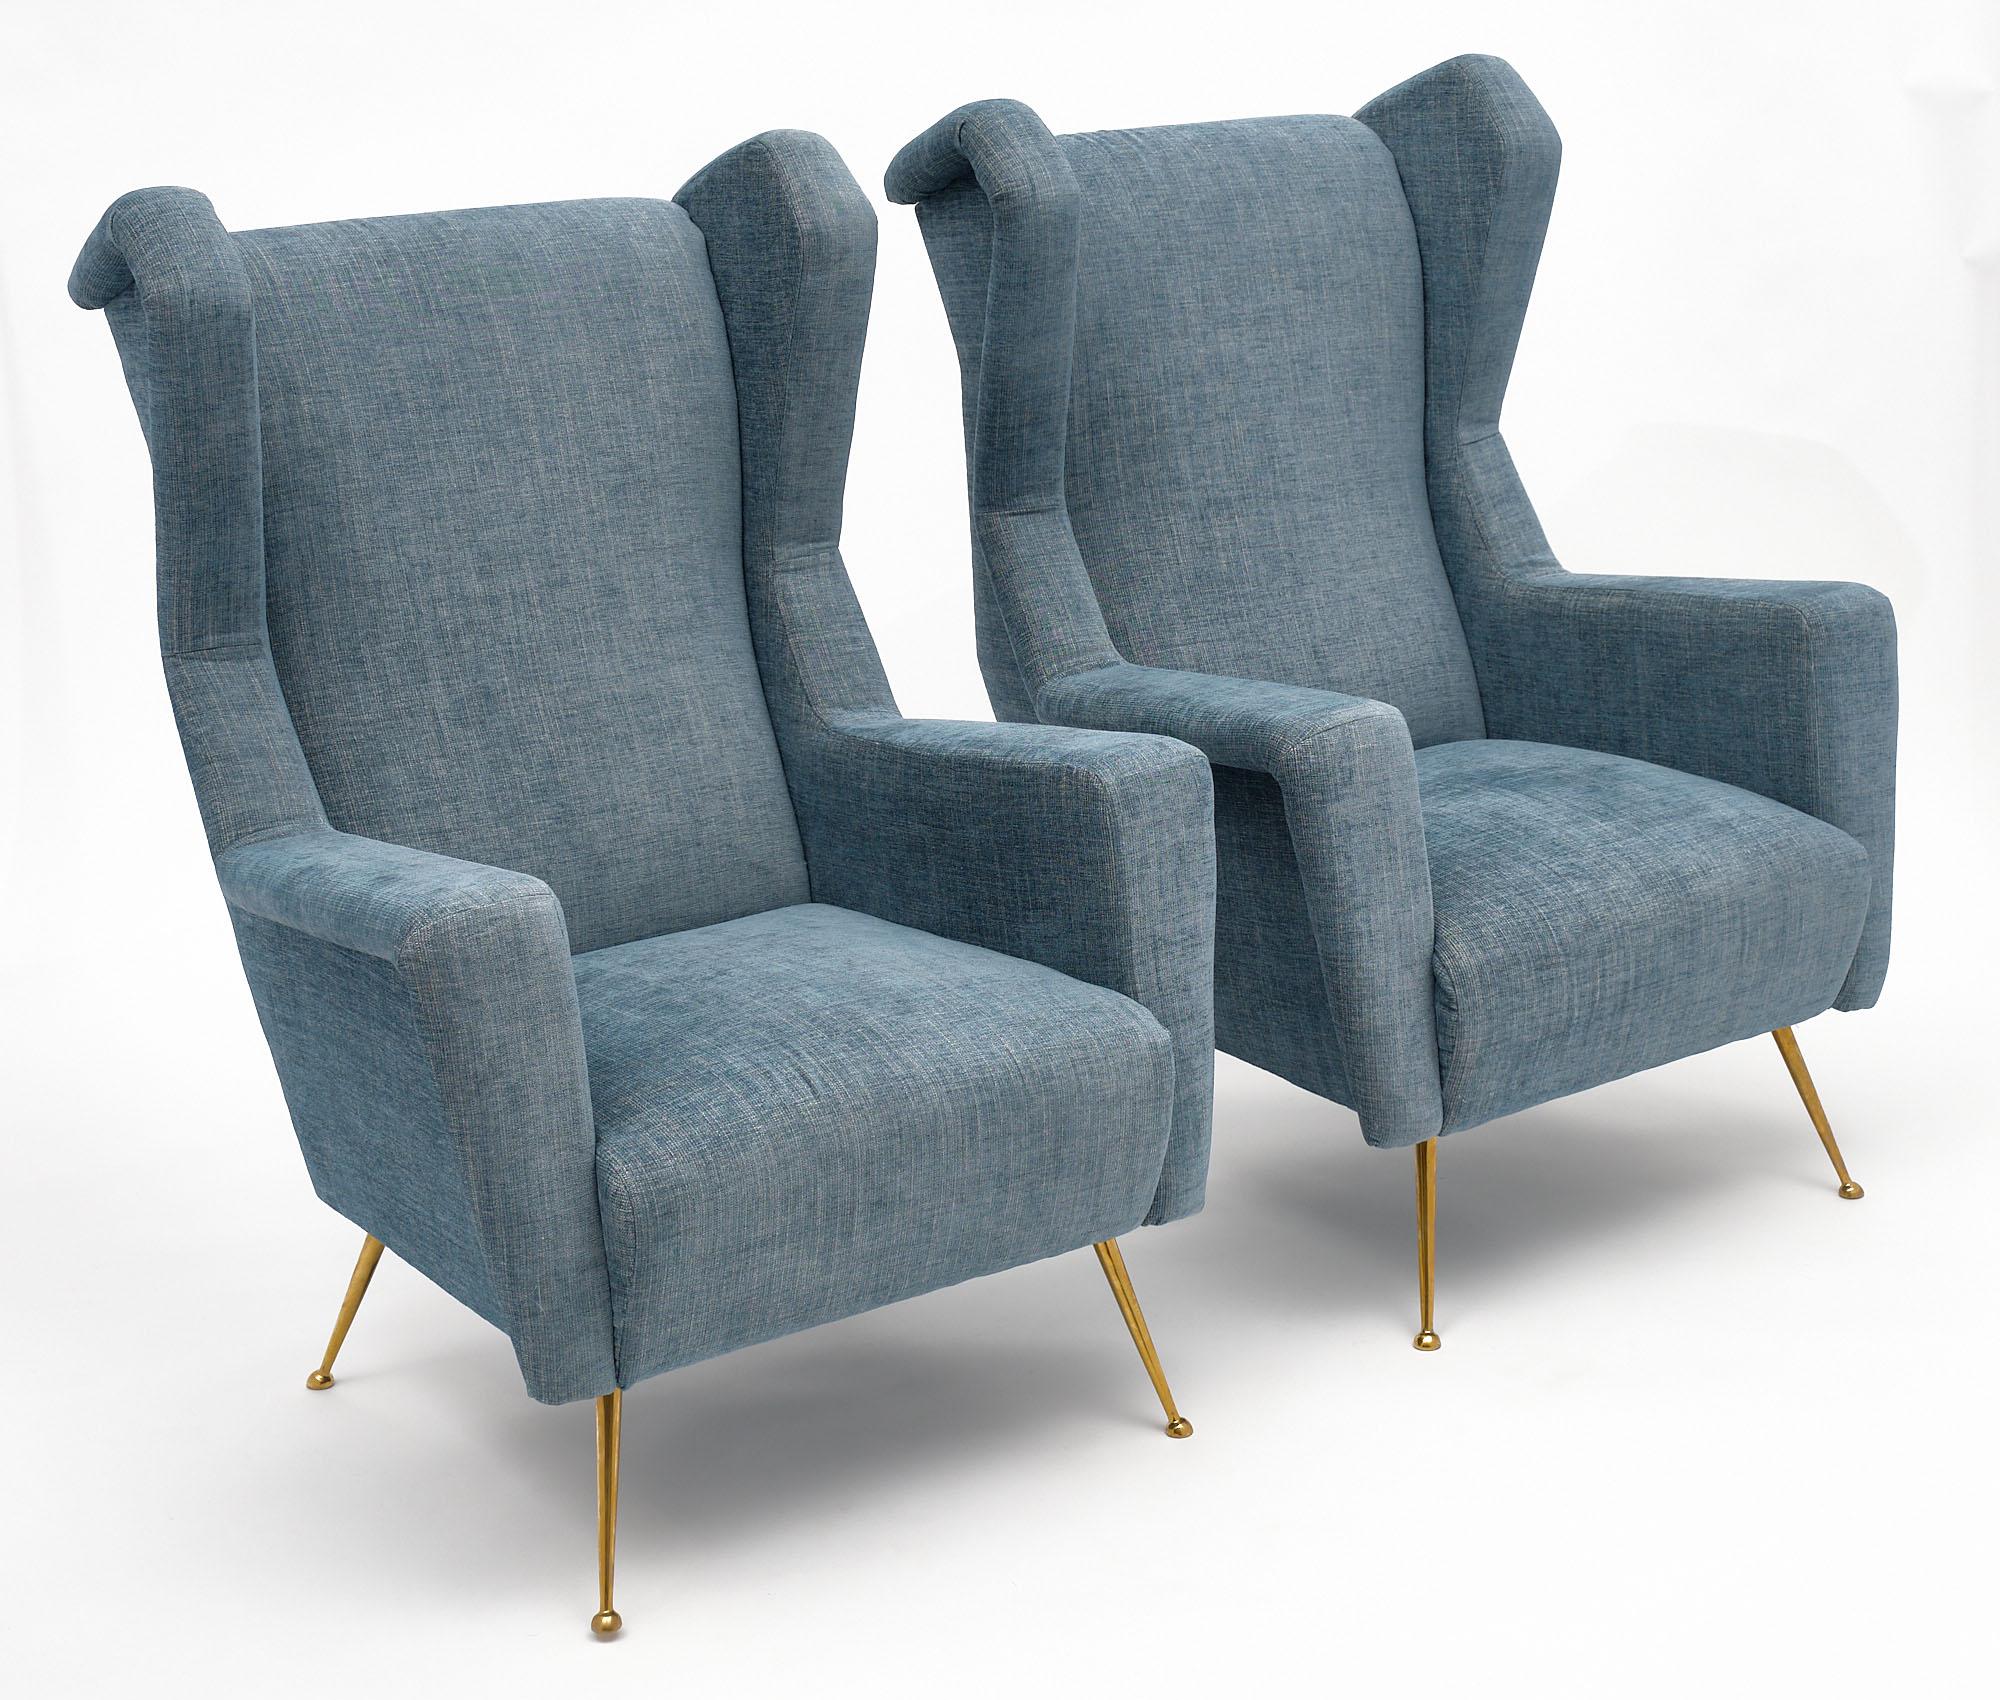 Pair of vintage armchairs or “bergeres” in the style of Carlo di Carli. They have been newly upholstered in a blue wool blend mix. We are drawn to the solid gilt brass legs and strong proportions of this pair.